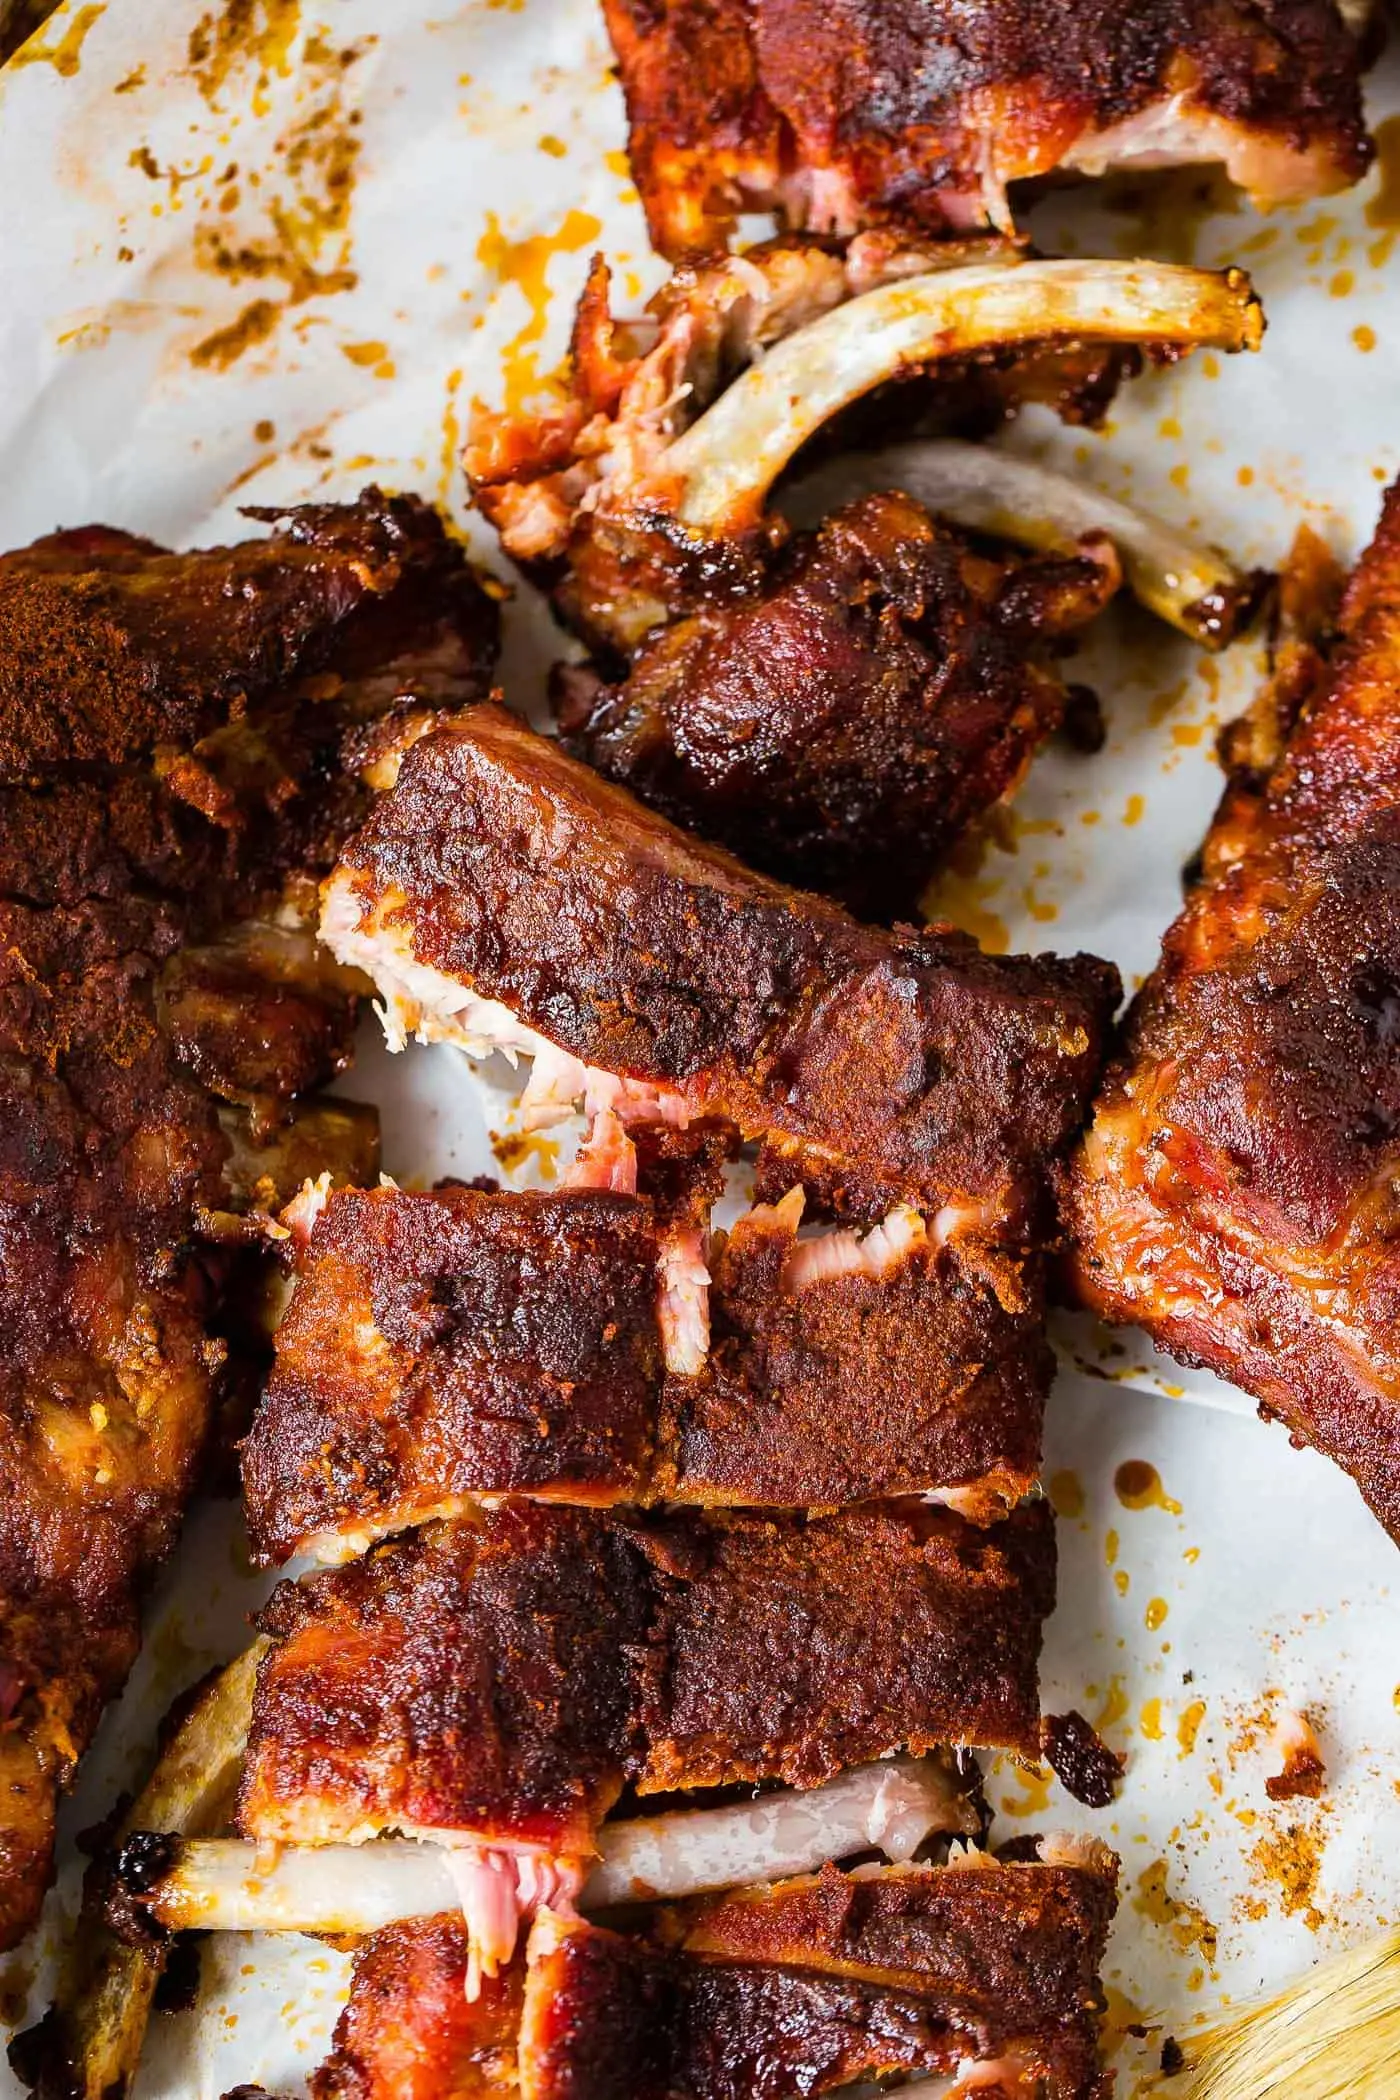 dry smoked ribs - Why are they called dry ribs